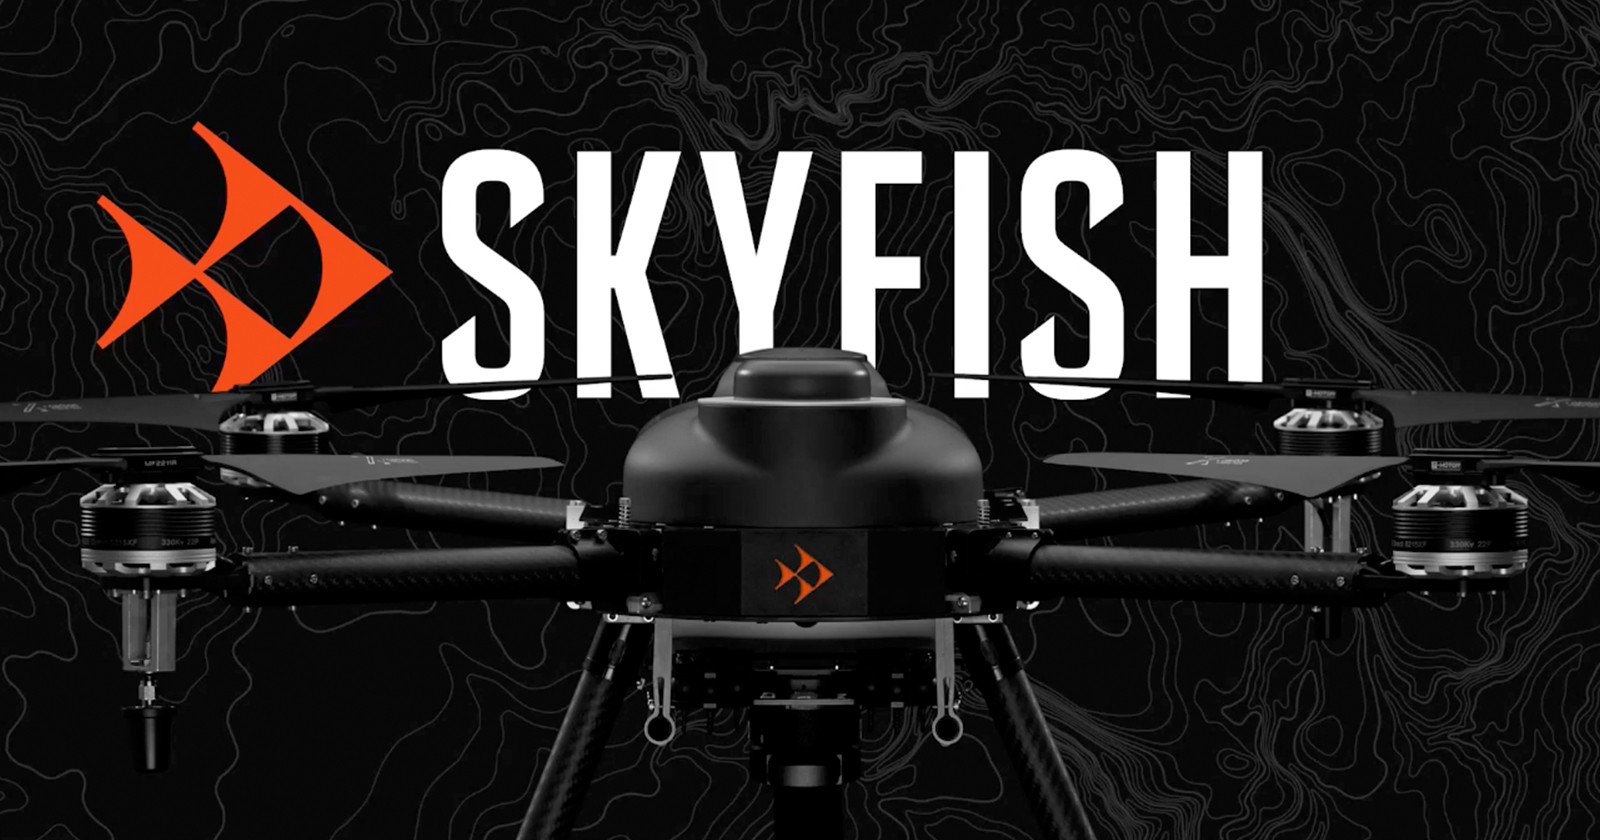  skyfish drones use sony cameras precisely model large 